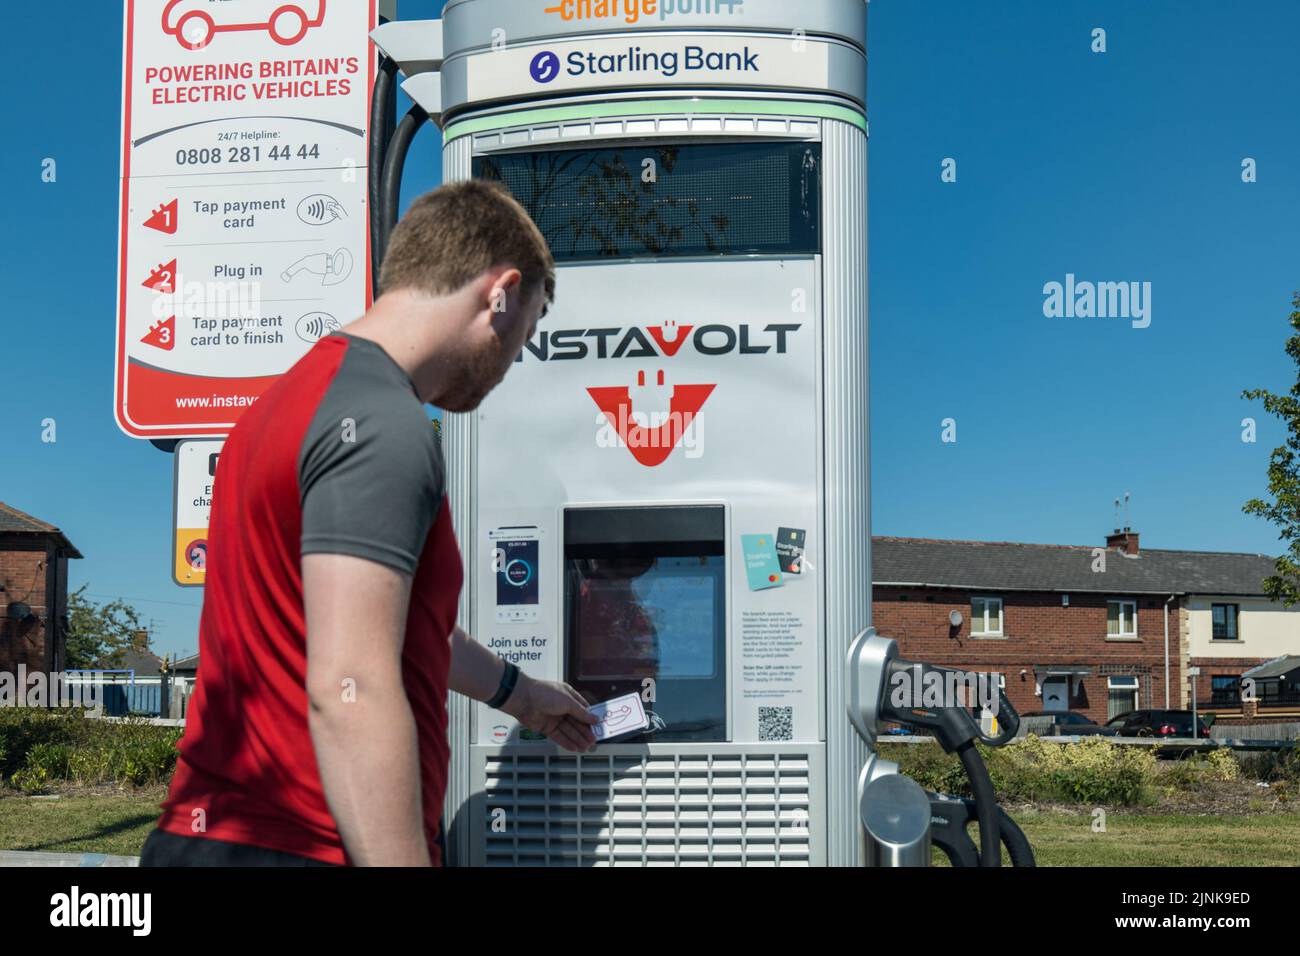 Young man using an electric vehicle chargepoint operated by Instavolt, a company owning a nationwide network of electric vehicle chargepoints, They announced price increases to 66p per kwh due to energy price crisis in summer 2022. Stock Photo